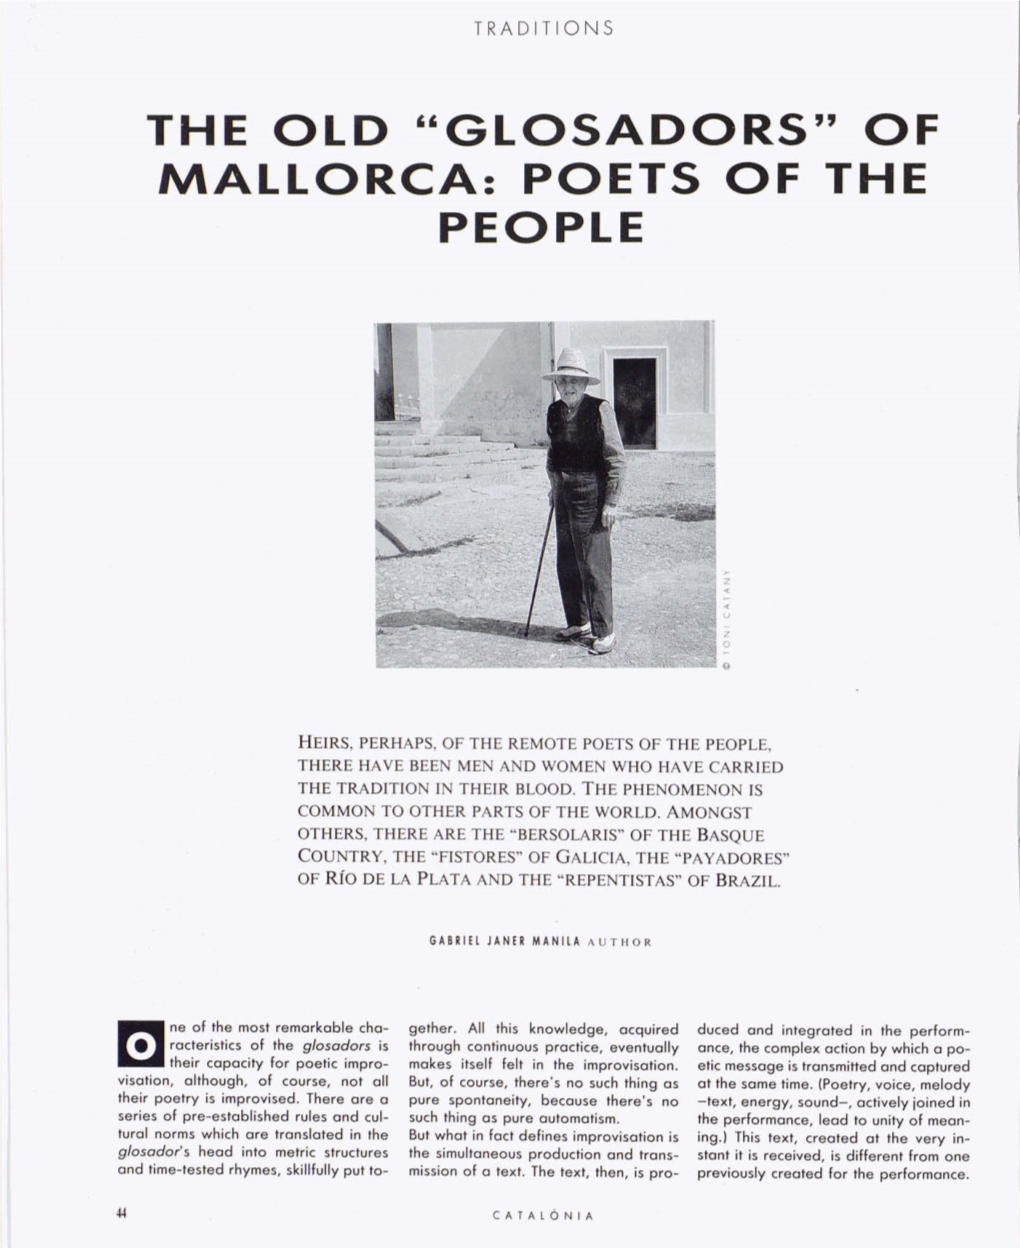 "Glosadors" of Mallorca: Poets of the People